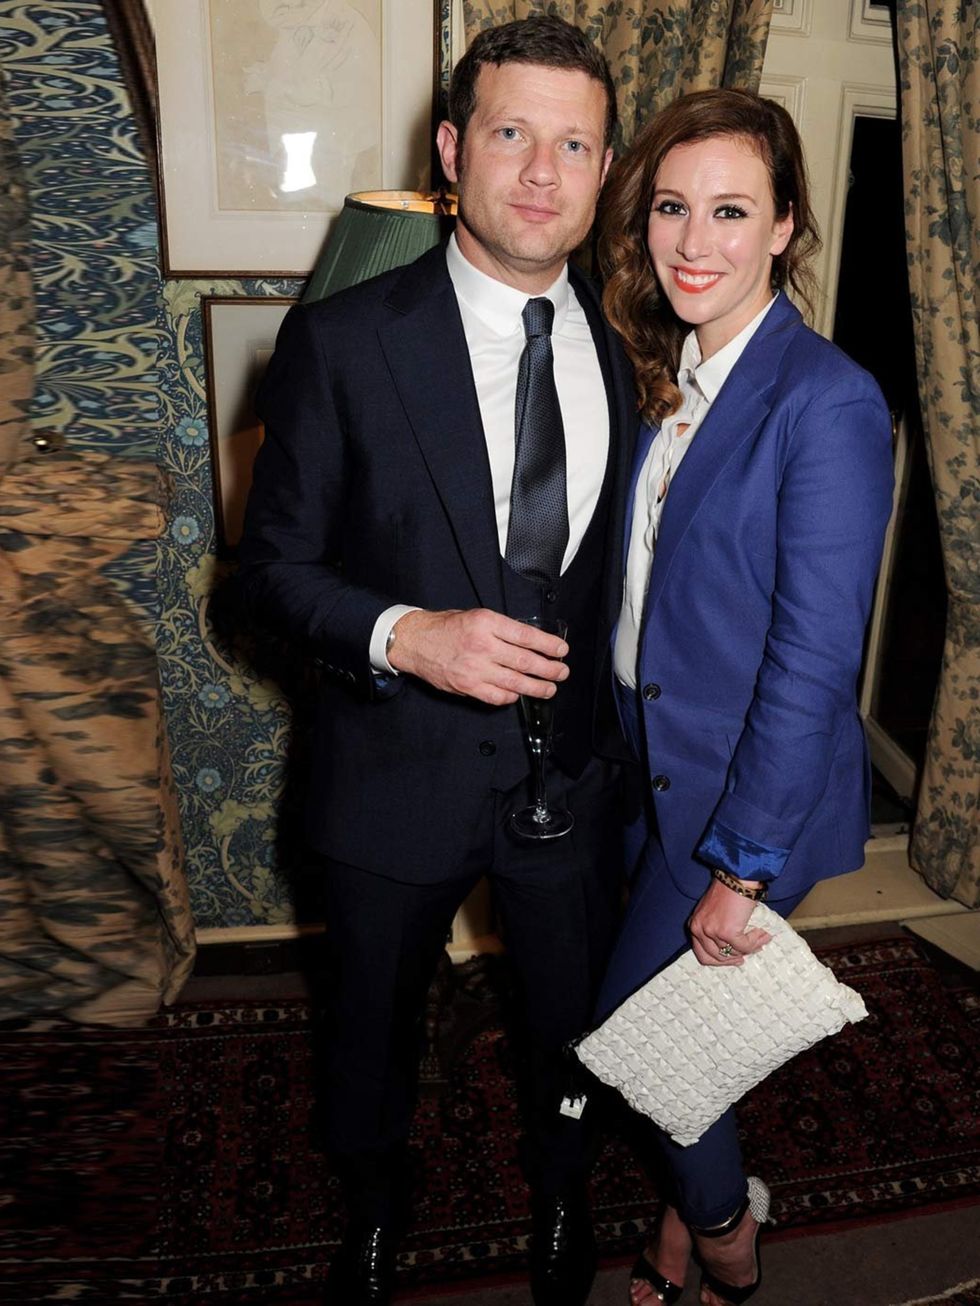 <p>Dermot O'Leary and Dee Koppang at the <a href="http://www.elleuk.com/catwalk/designer-a-z/tom-ford/autumn-winter-2013">Tom Ford</a> Mens Grooming Collection launch at Mark's Club on 18 June 2013.</p>